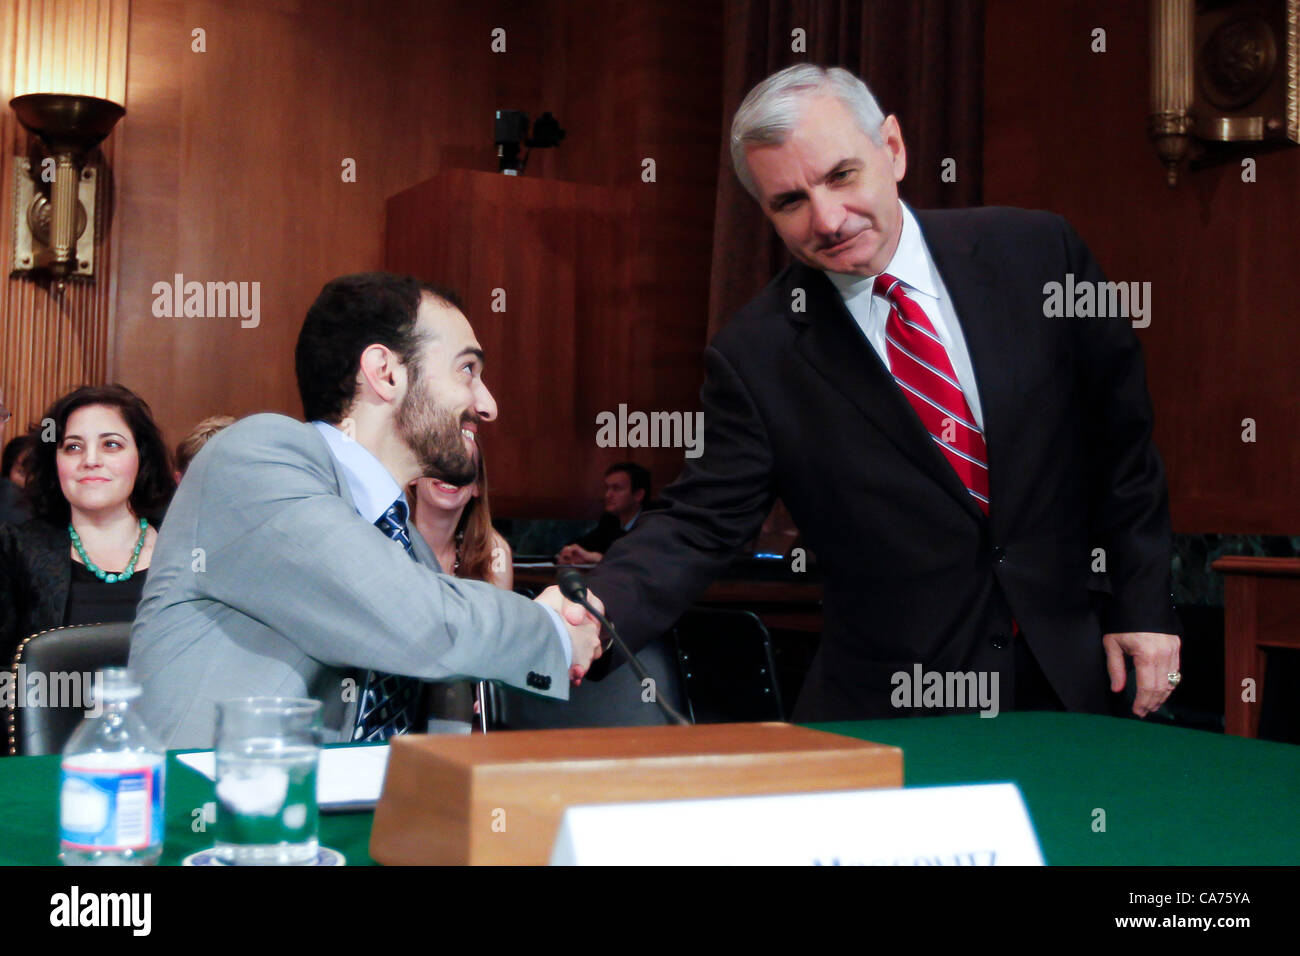 June 20, 2012 - Washington, DC, U.S. - ILAN MOSCOVITZ of The Motley Fool, greets Senator JACK REED prior to the Senate Securities, Insurance and Investment Subcommittee hearing on ''Examining the IPO Process: Is It Working for Ordinary Investors? (Credit Image: © James Berglie/ZUMAPRESS.com) Stock Photo